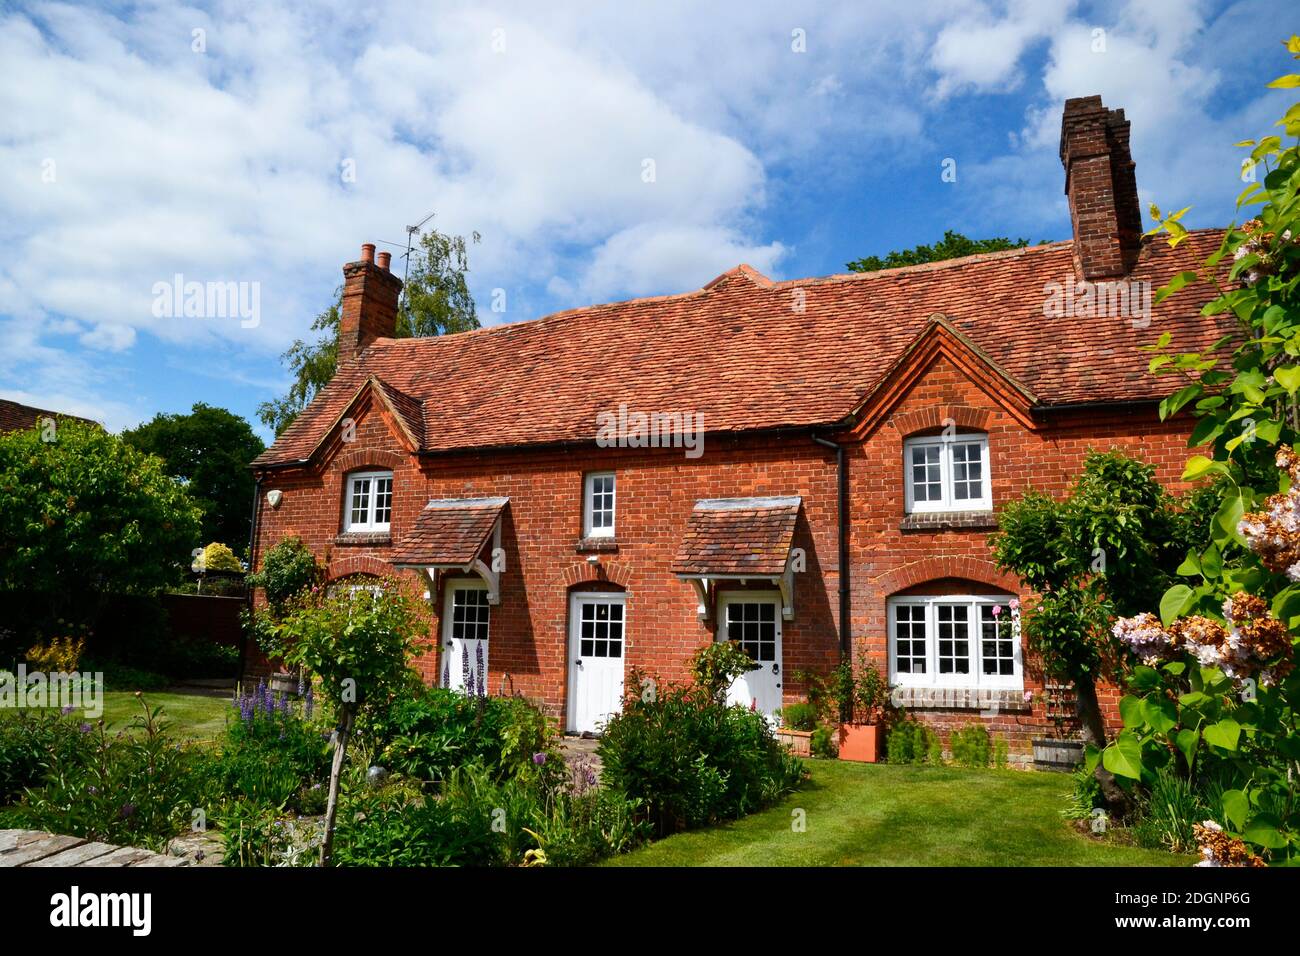 Pretty cottages in Lee Common, a village in Buckinghamshire, UK Stock Photo